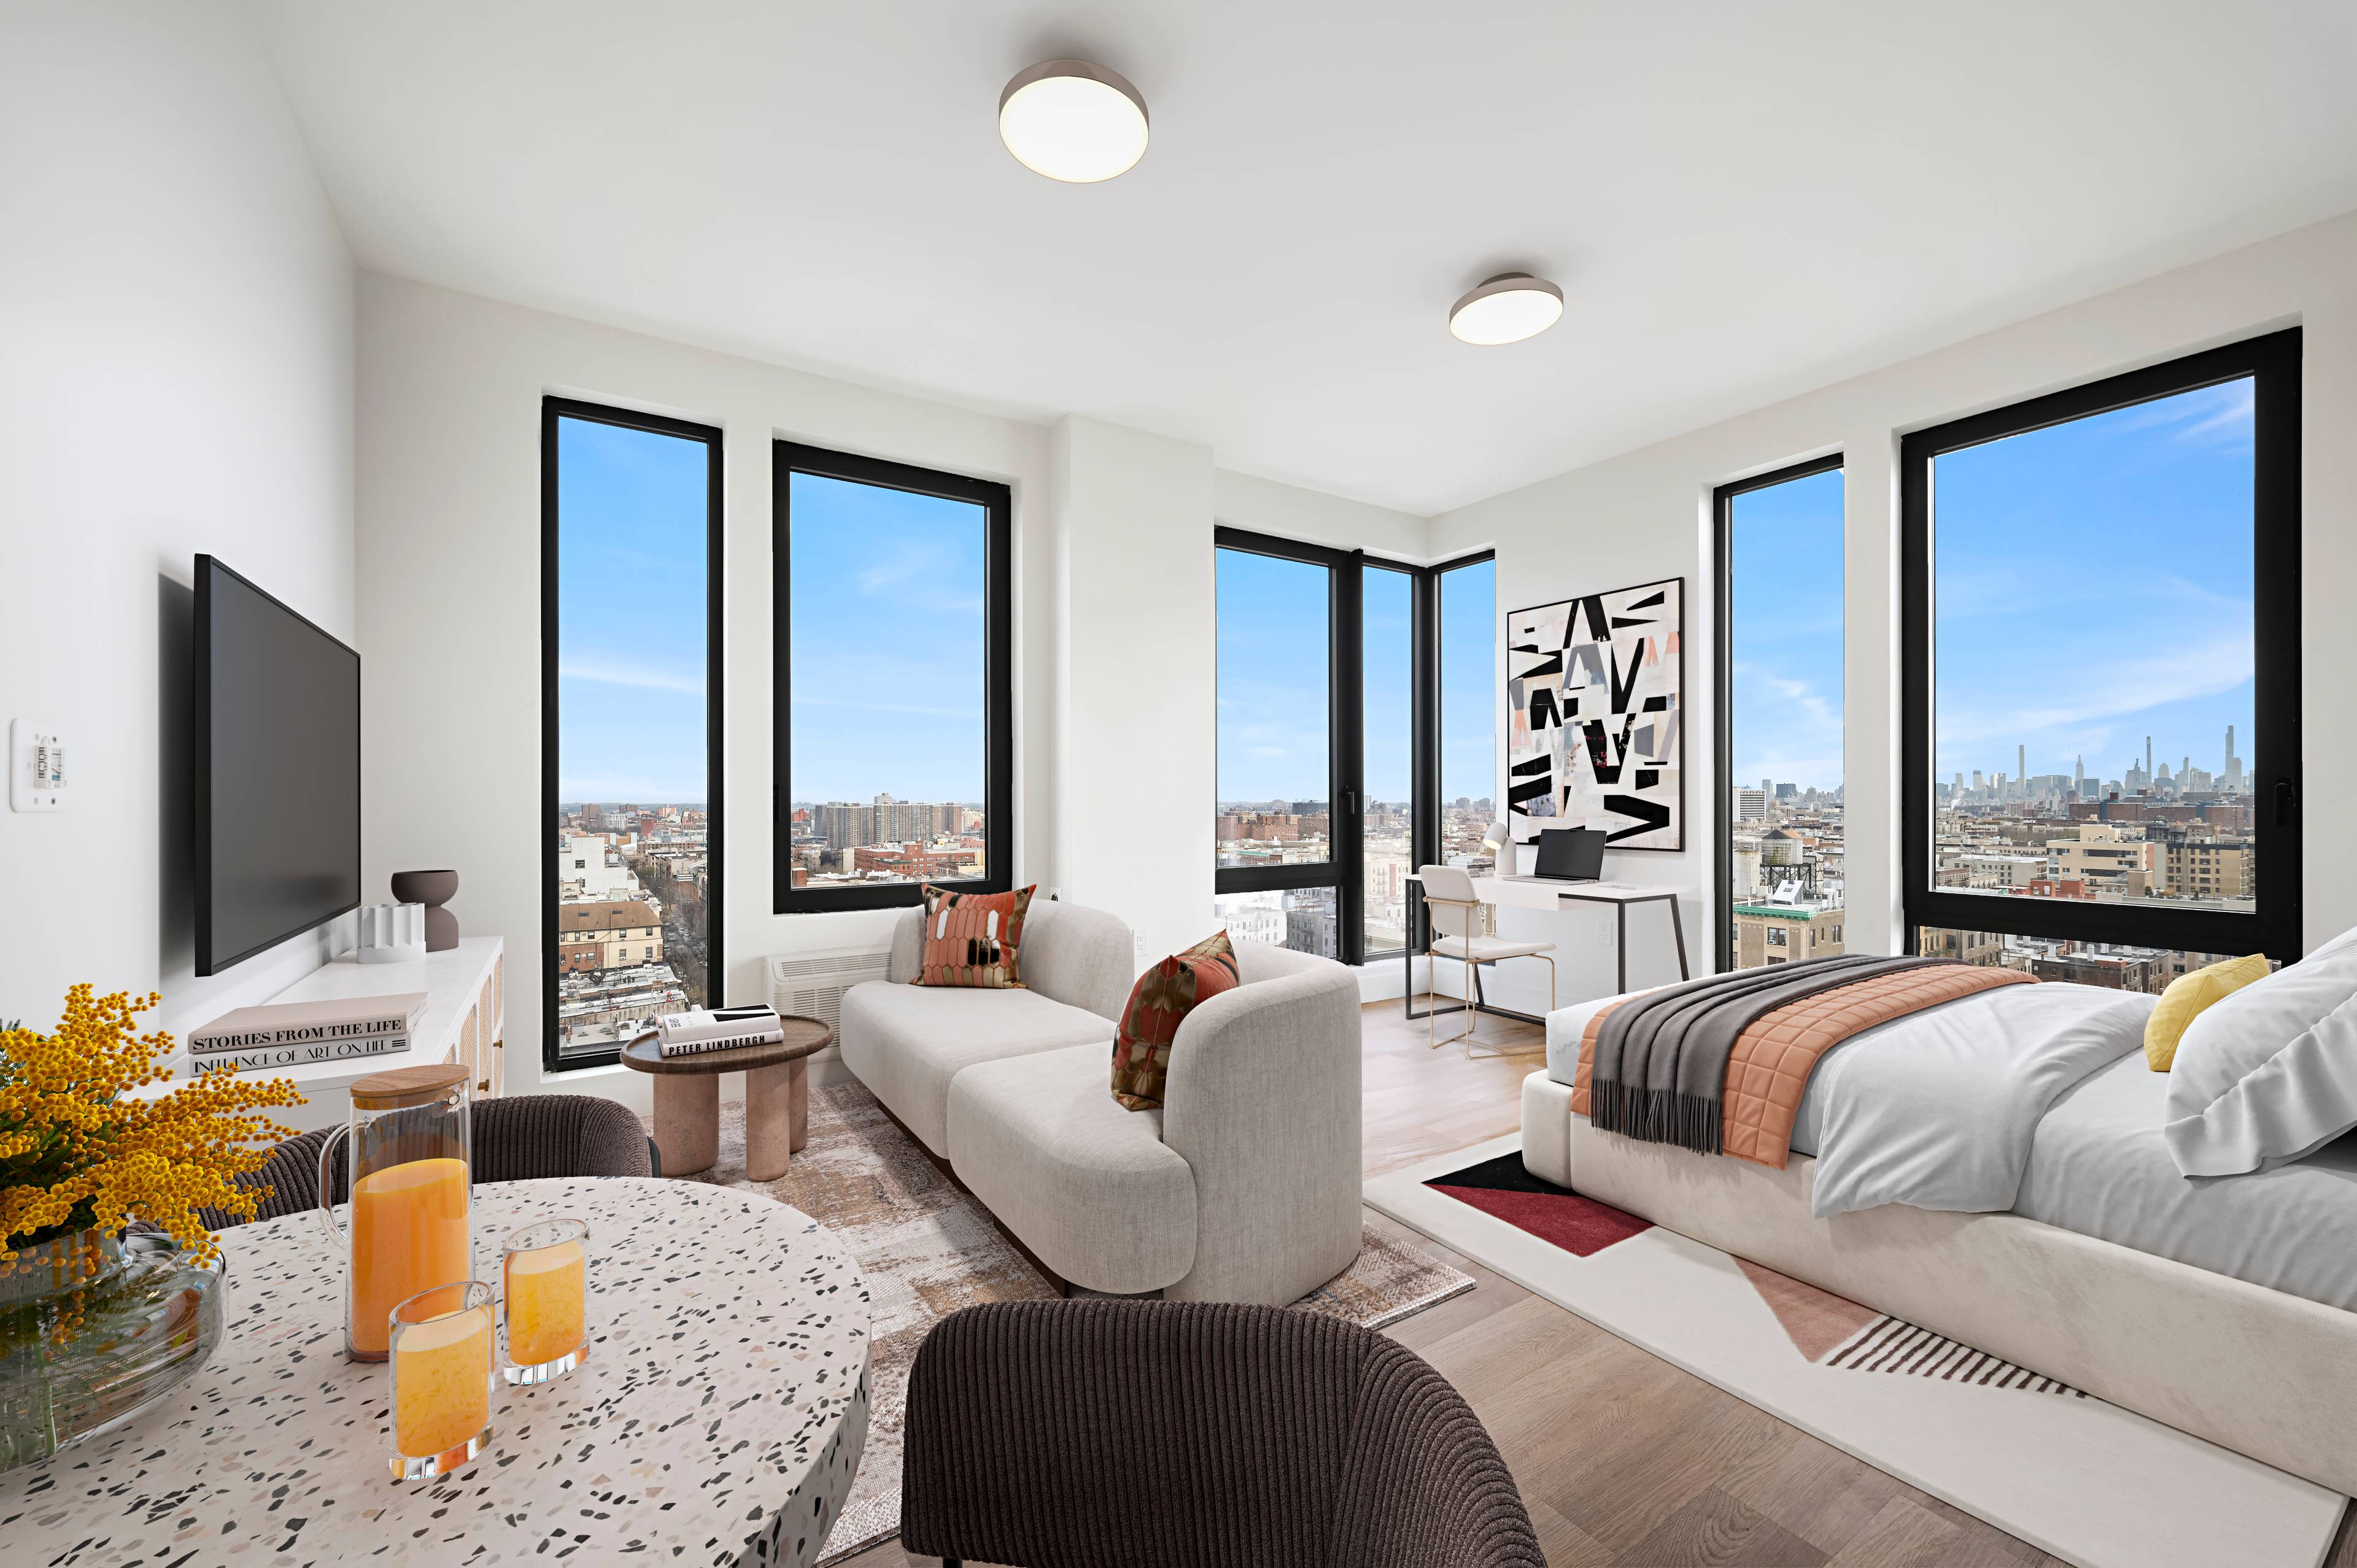 CALL THE LEASING OFFICE DIRECTLY TO SEE ANYTHING IN THIS BRAND NEW LUXURY BUILDING STUDIOS, 1 BEDS, 2 BEDS 2BATHS amp ; 3 BEDS 2BATHS ALL AVAILABLE !